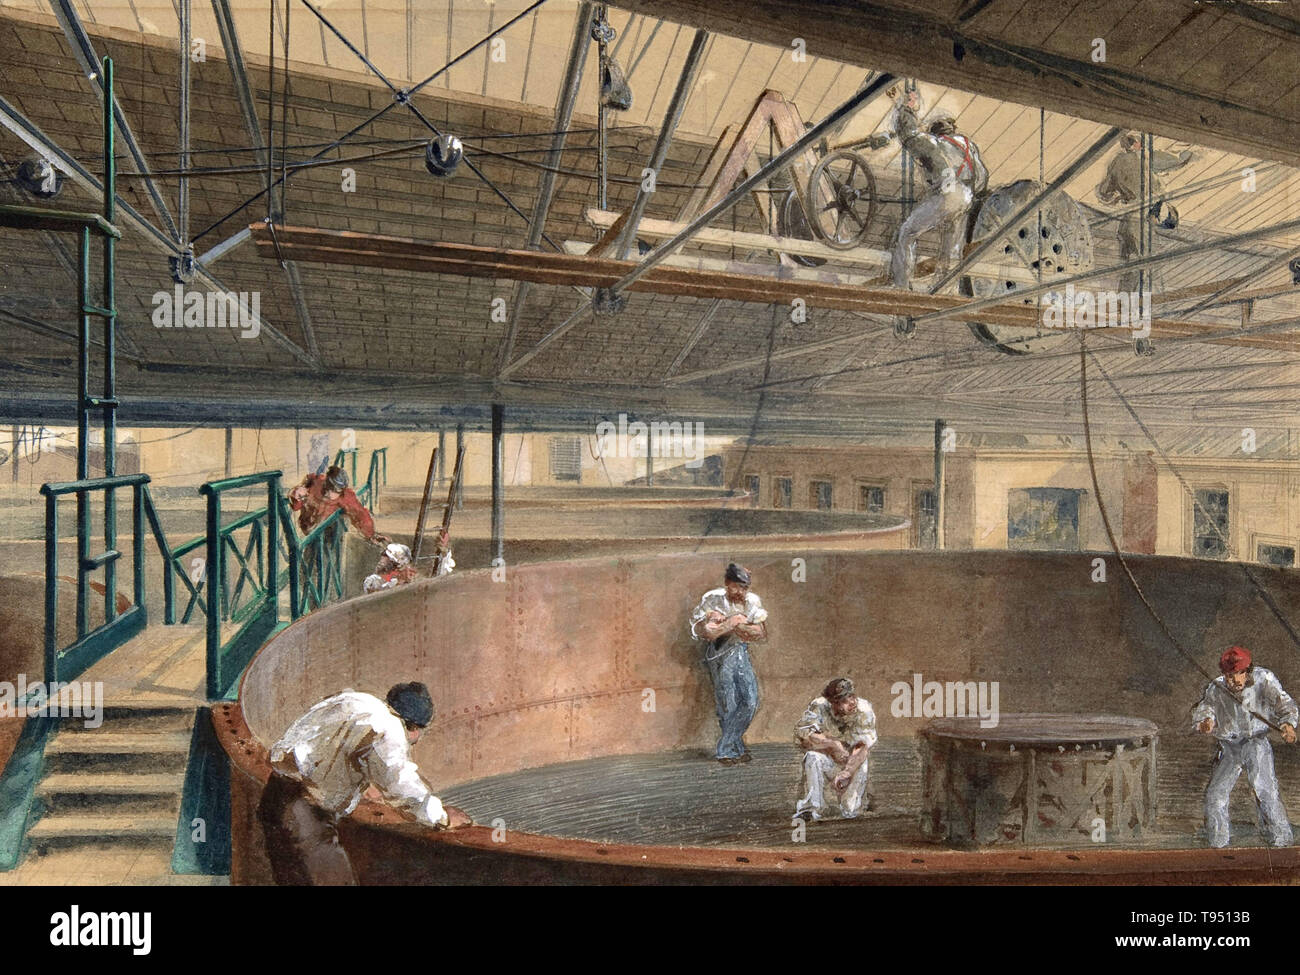 Coiling the Cable in the Large Tanks at the Works of the Telegraph Construction and Maintenance Company of Greenwich, (1865-66), by Robert Charles Dudley (British, 1826-1909). One of the 19th century's great technological achievements was to lay a telegraphic cable beneath the Atlantic, allowing messages to speed back and forth between North America and Europe in minutes, rather than ten or twelve days by steamer. An initially successful attempt in 1858, led by Cyrus W. Stock Photo